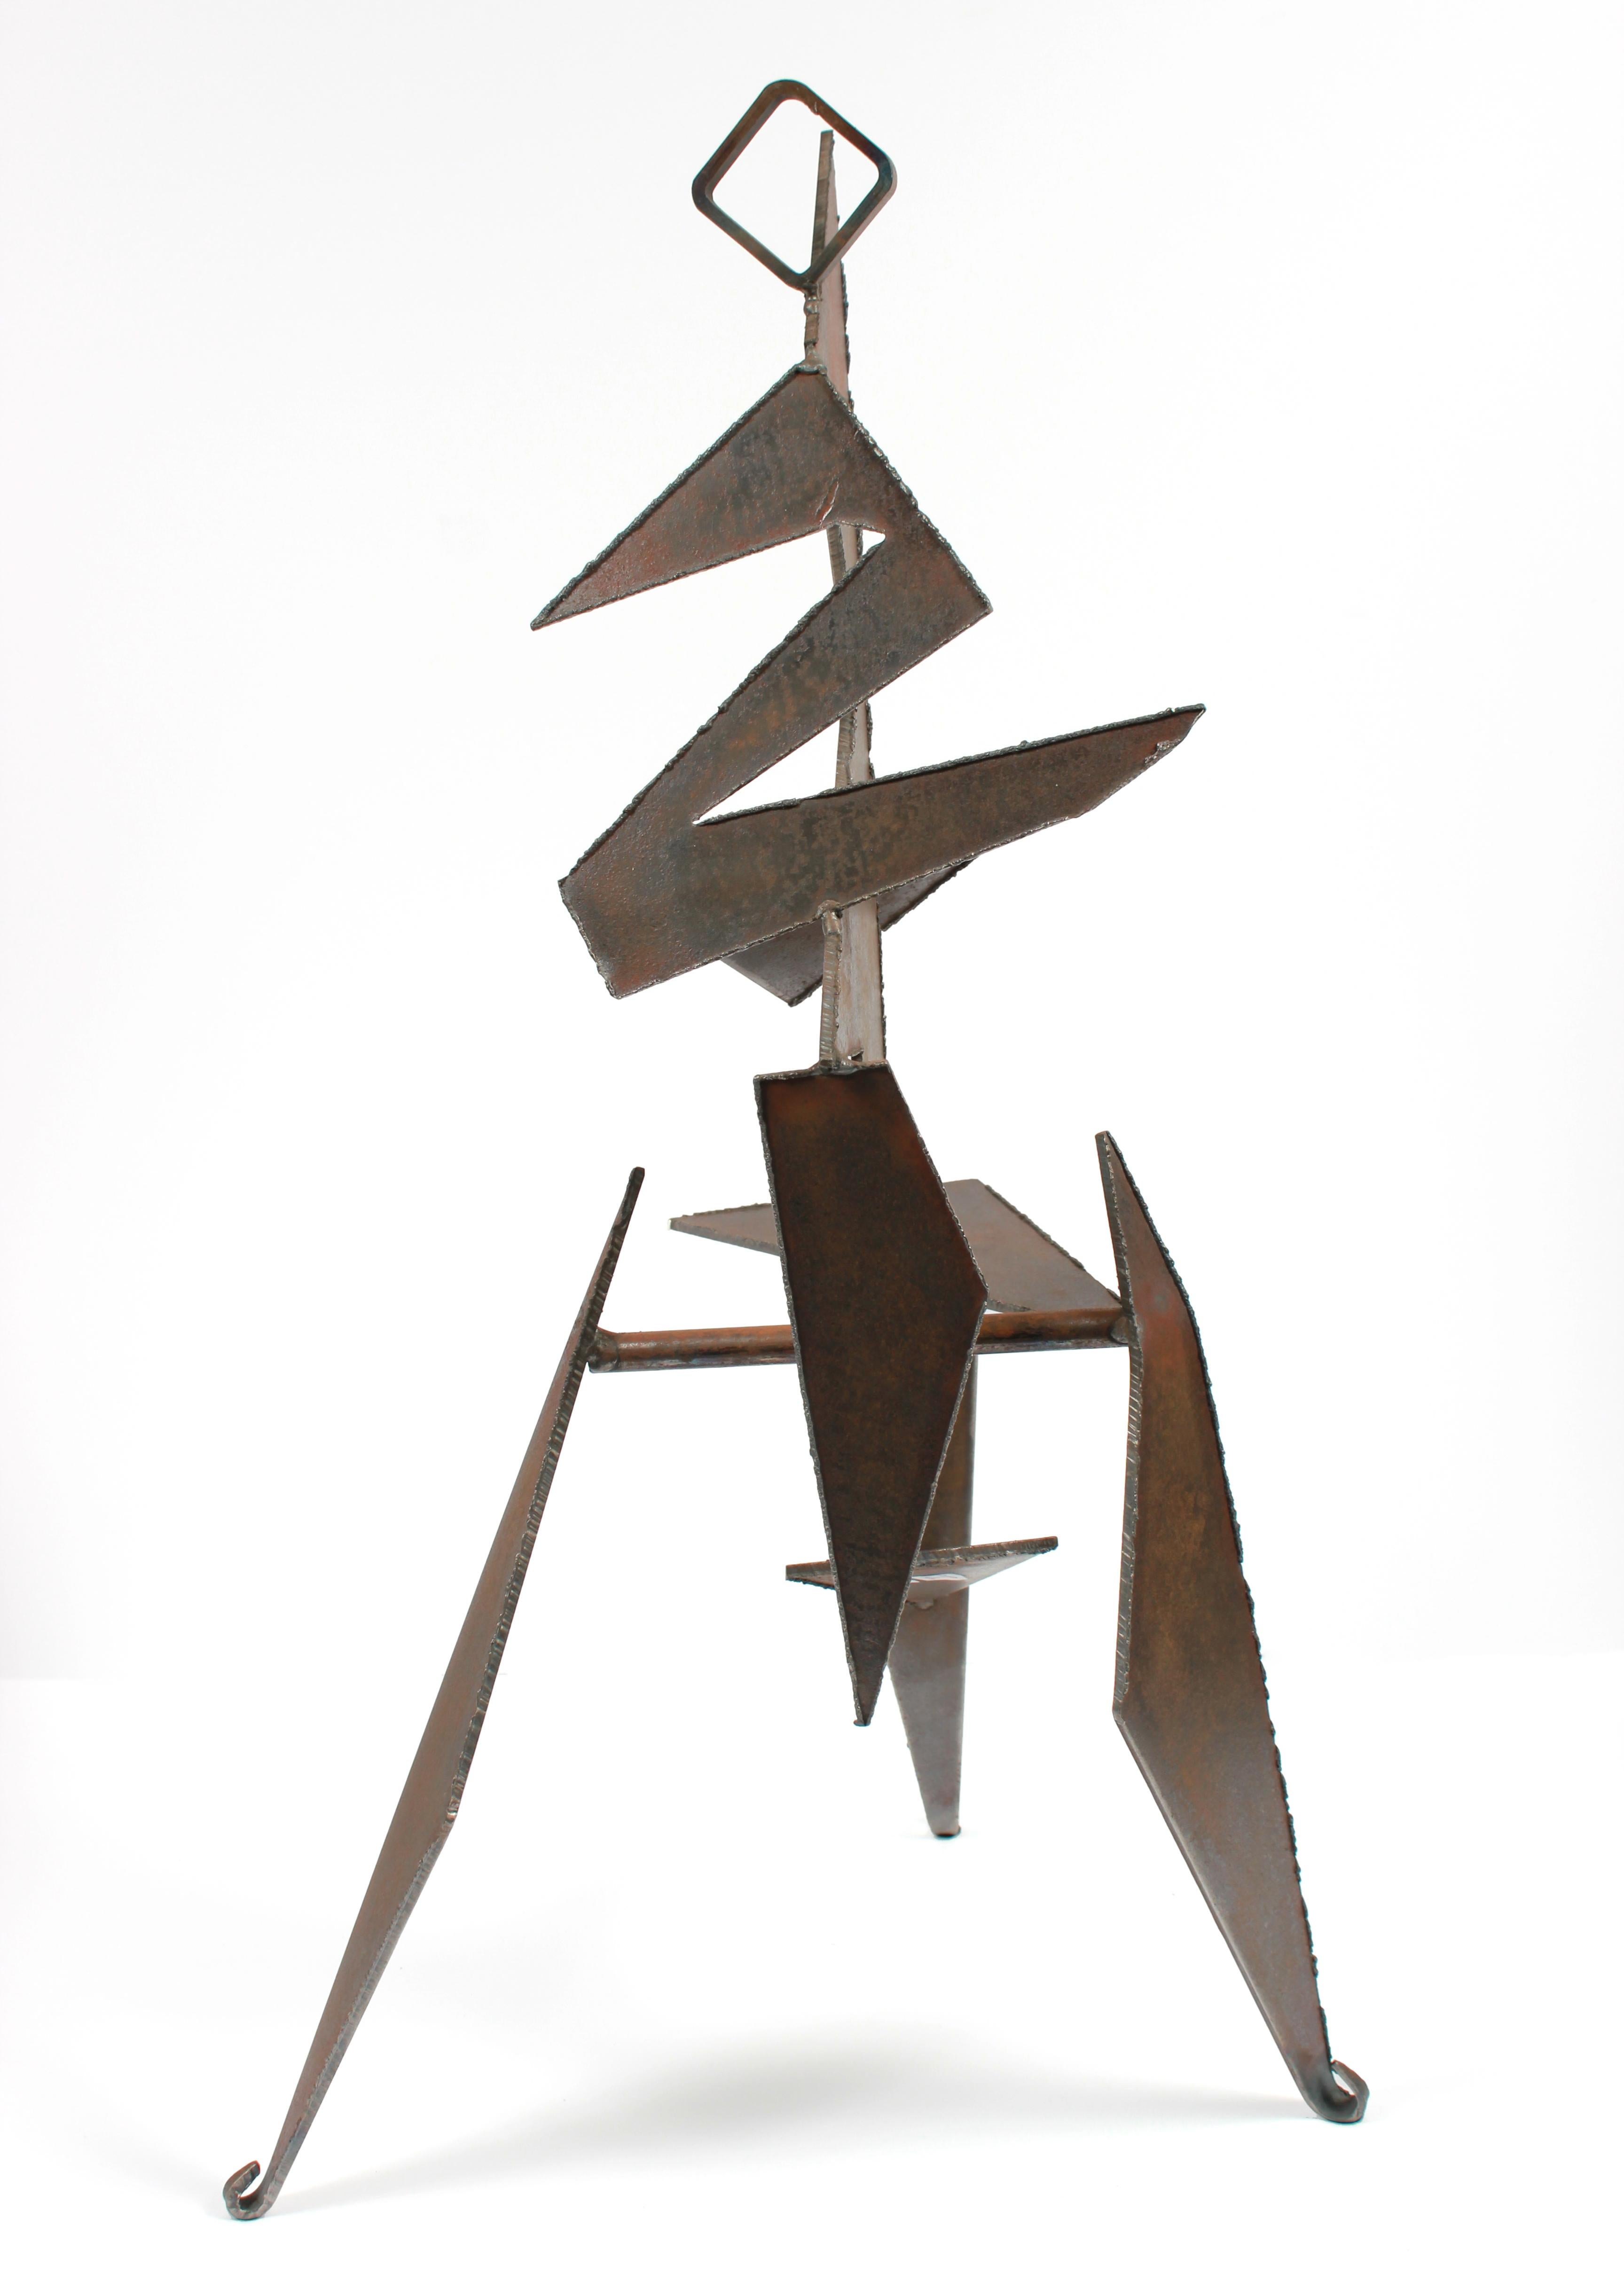 Unknown Figurative Sculpture - 20th Century Angular Geometric Standing Form in Welded Steel Sculpture